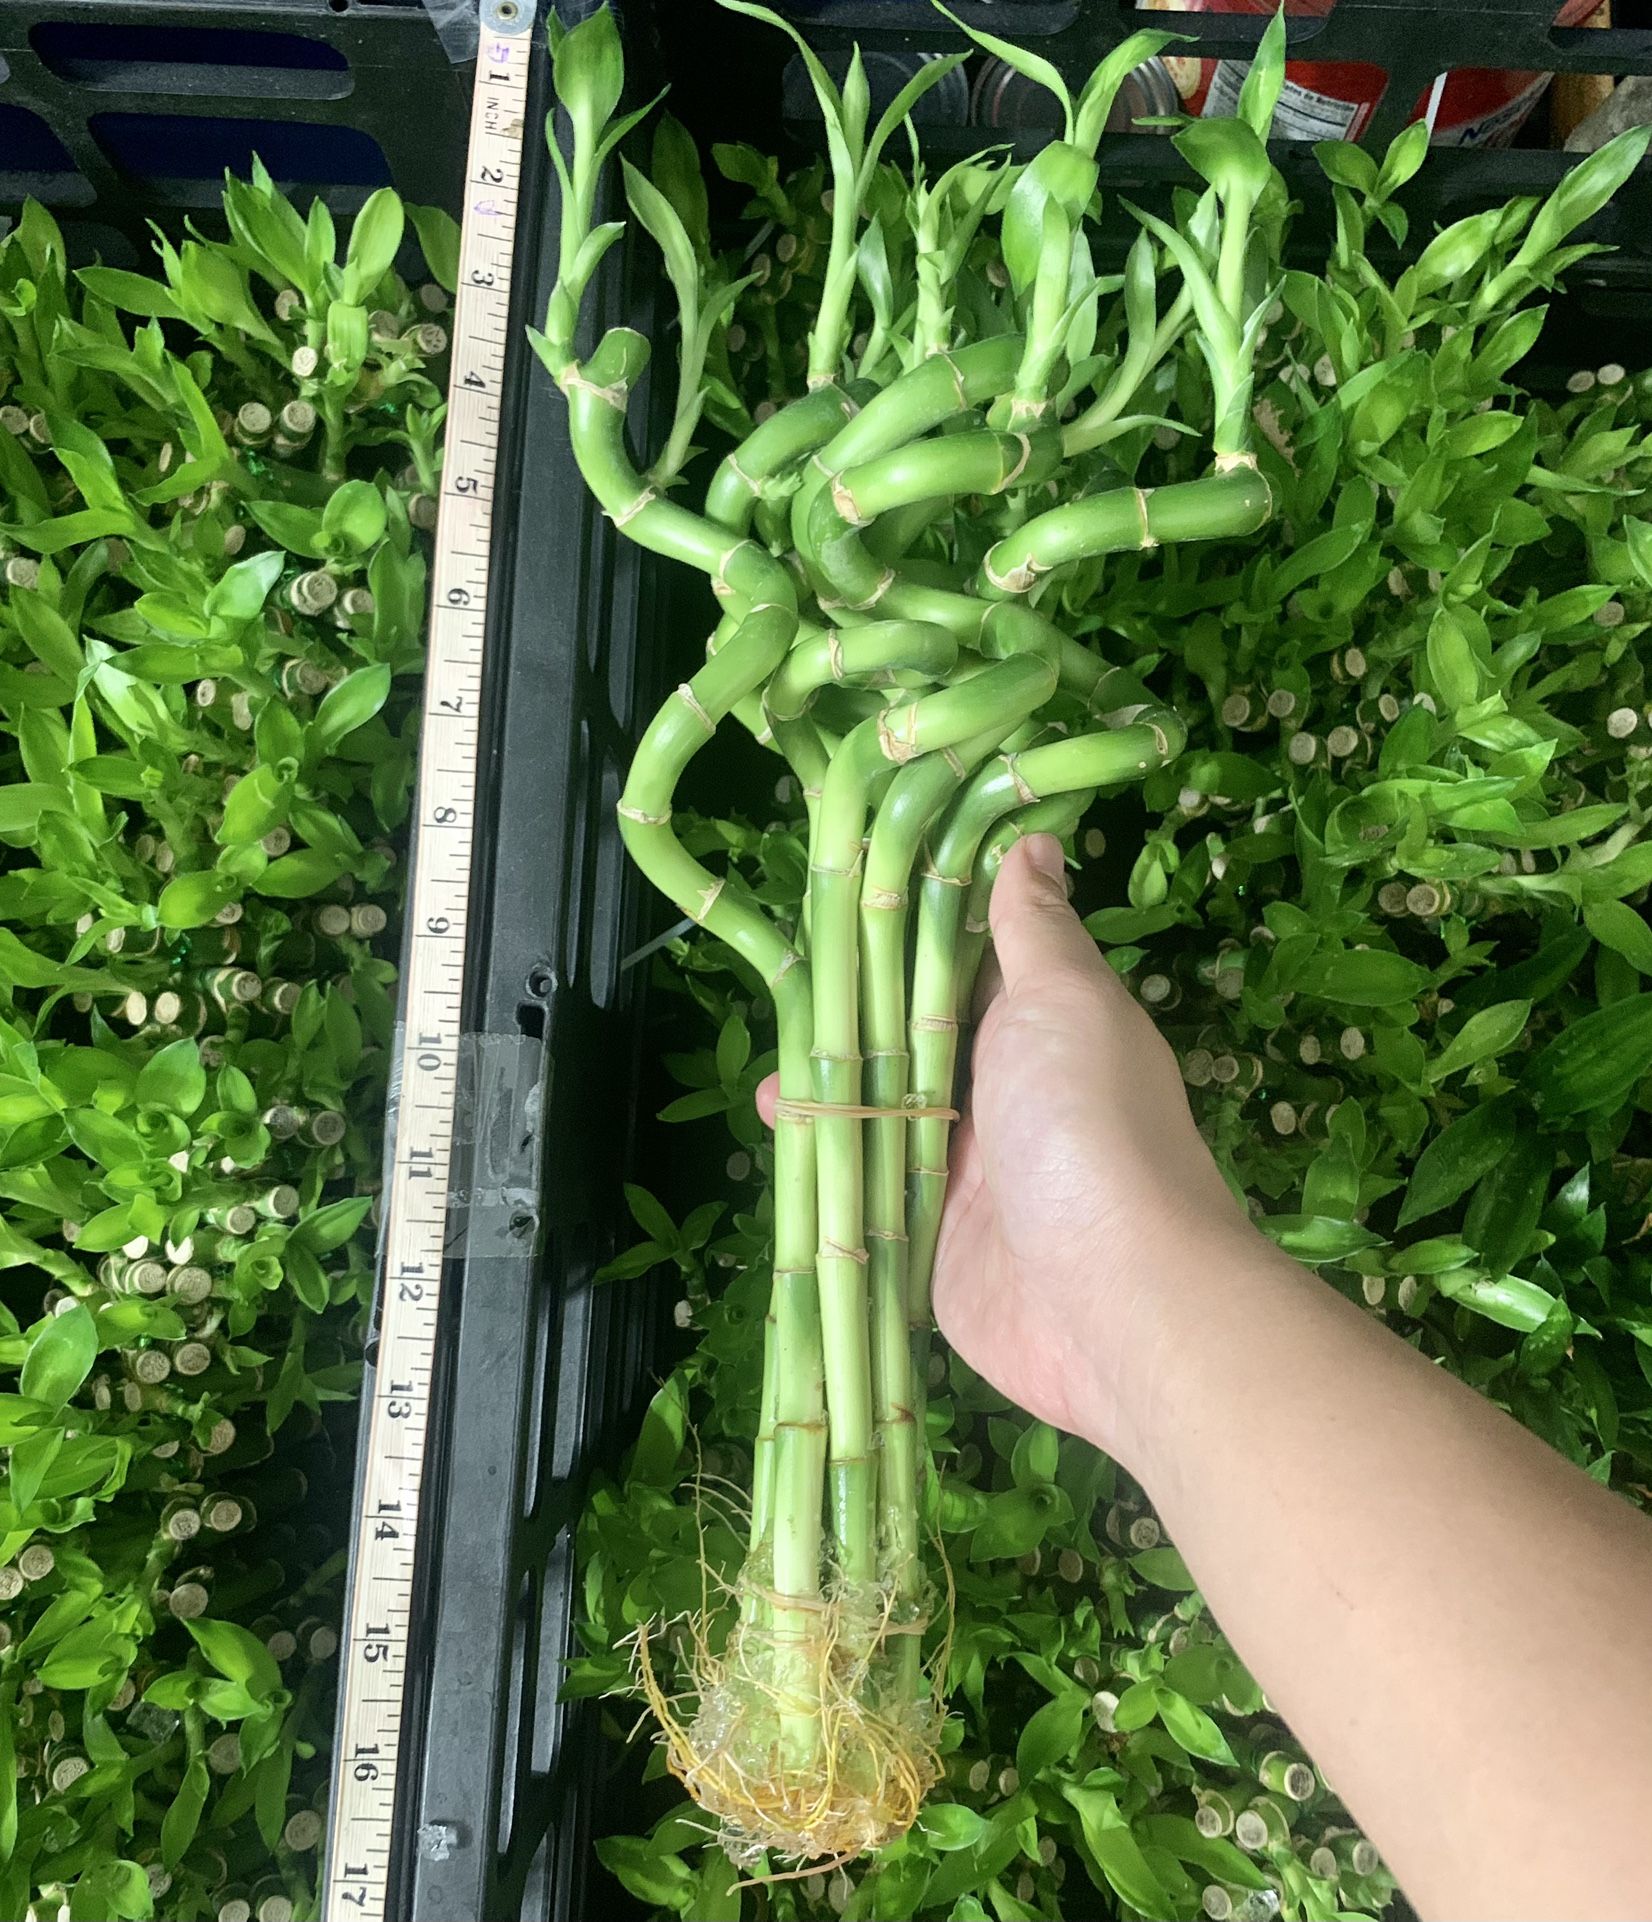 SHIPPING AVAILABLE Spiral Lucky Bamboo Live Indoor Plant $18/bundle (10 Stalks/Bundle)